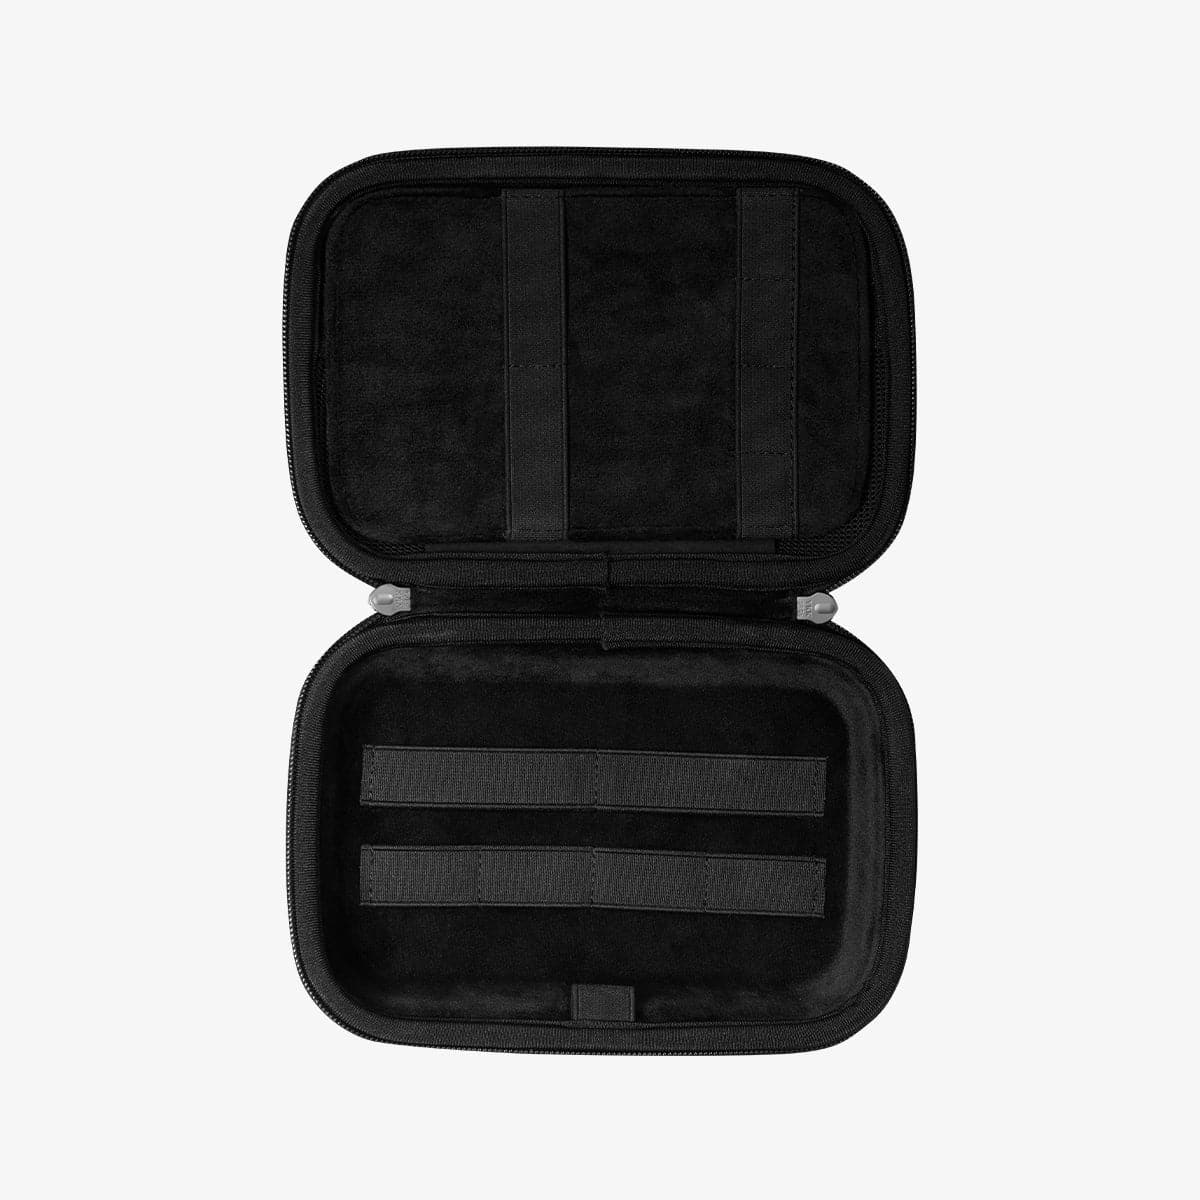 AFA04536 - Rugged Armor® Pro Cable Organizer Bag in black showing the inside